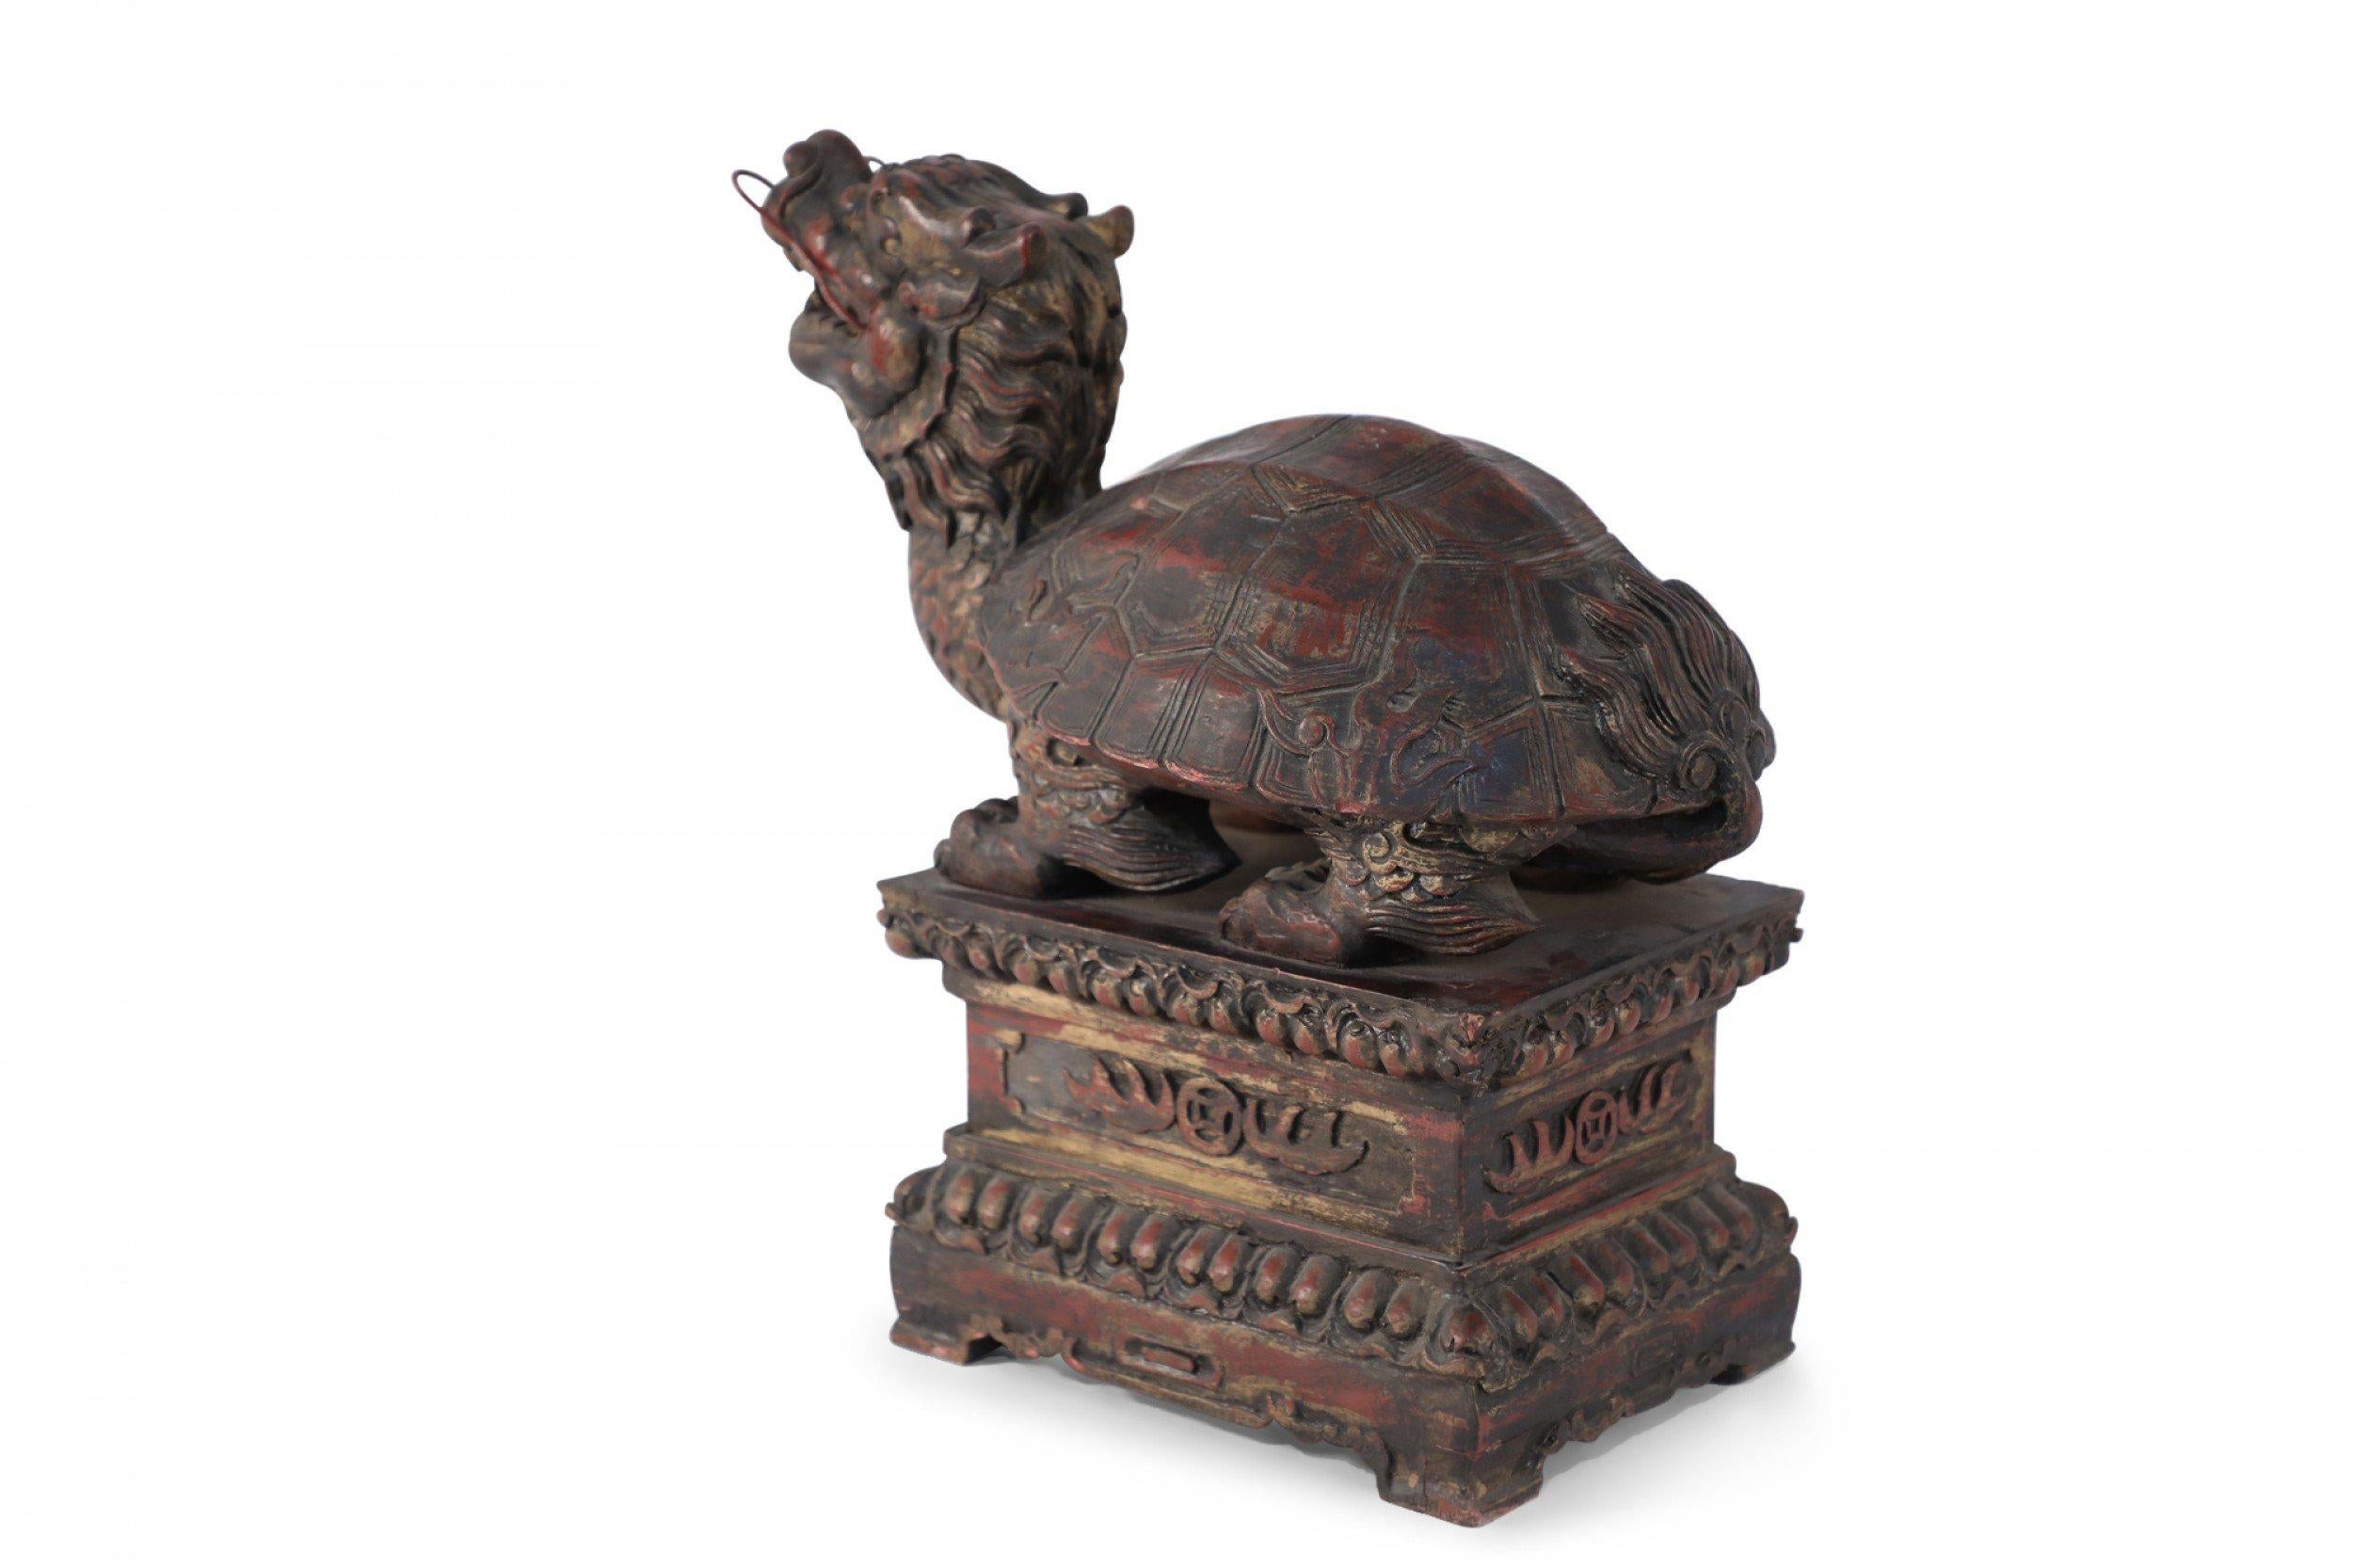 20th Century Antique Chinese Carved Wooden Longgui Dragon Turtle Sculpture For Sale